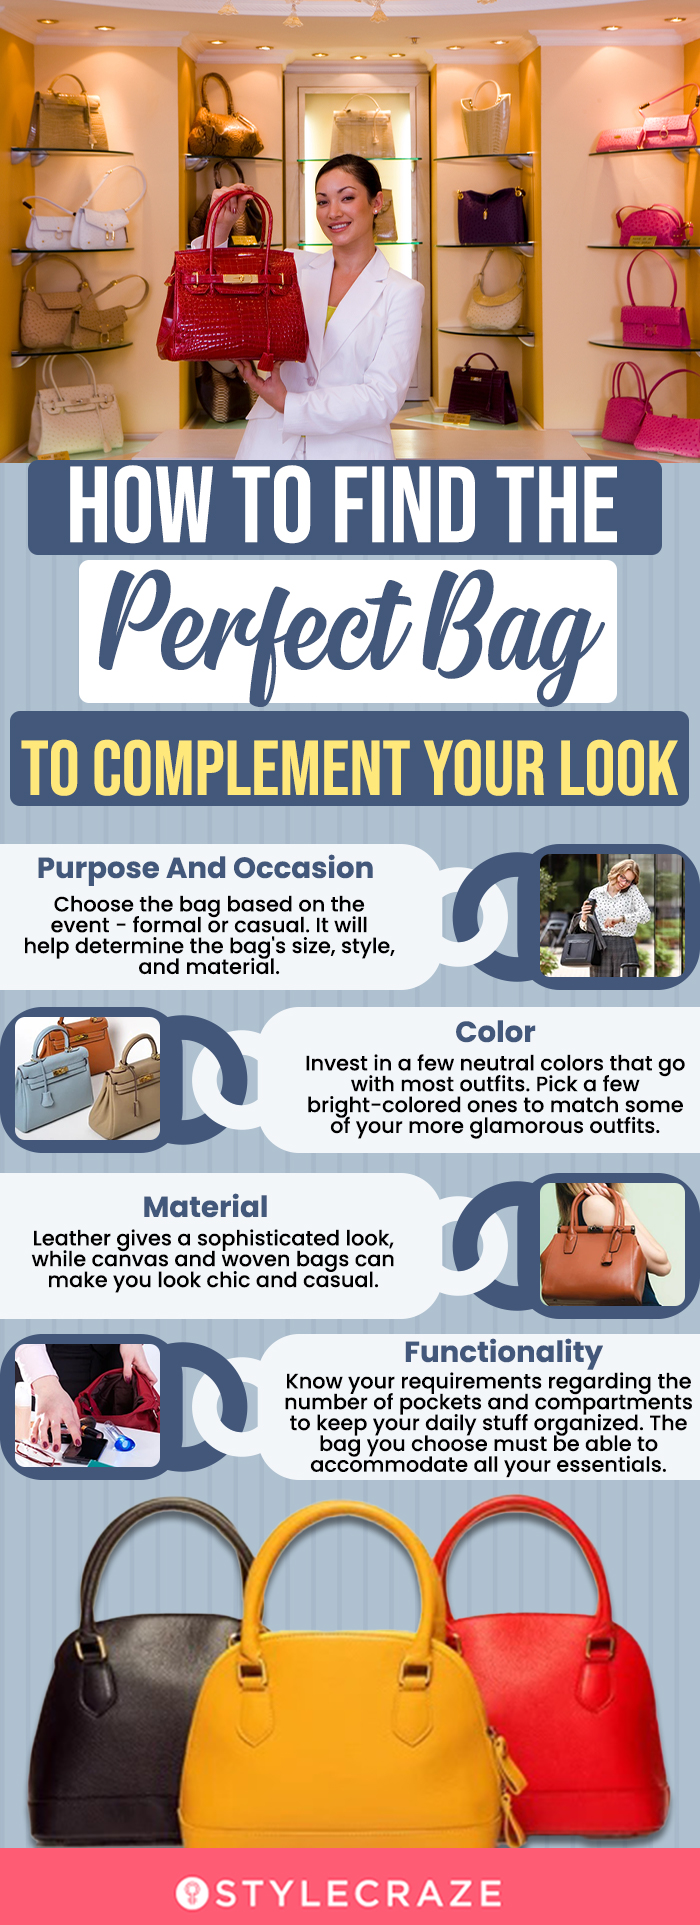 How To Find The Perfect Bag To Complement Your Look (infographic)